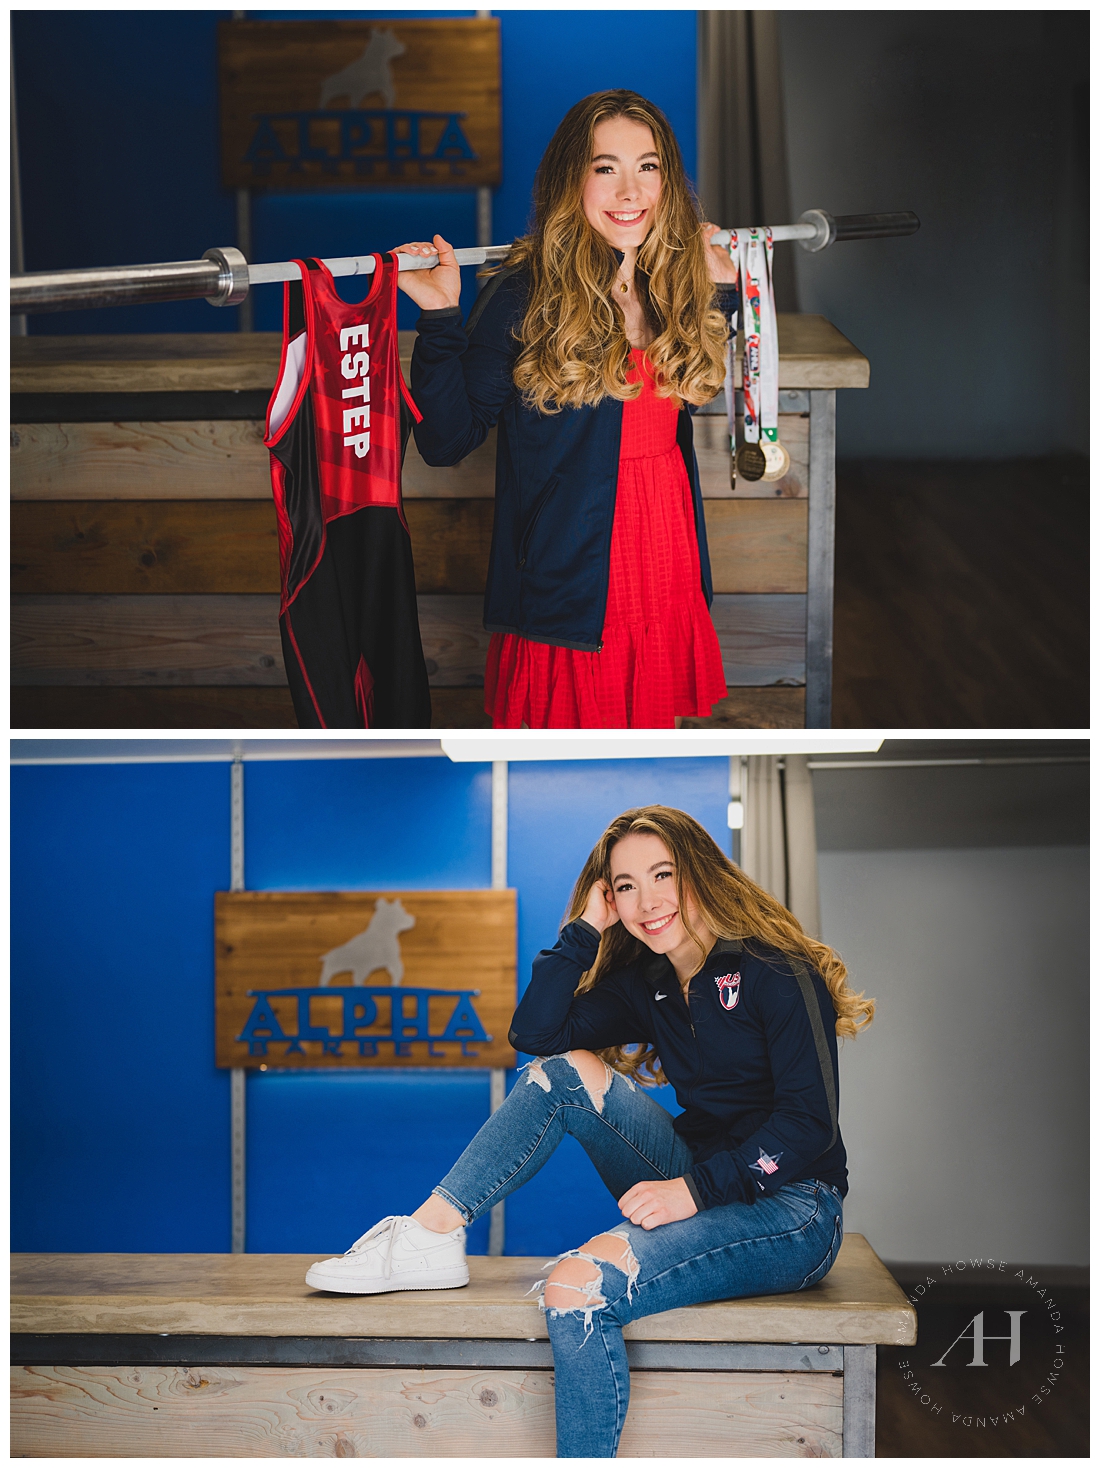 USA Weightlifting Senior Session | Cute Ideas For Athletic Seniors, Girls Who Lift, Unique Senior Photo Ideas | Photographed by the Best Tacoma Senior Photographer Amanda Howse Photography